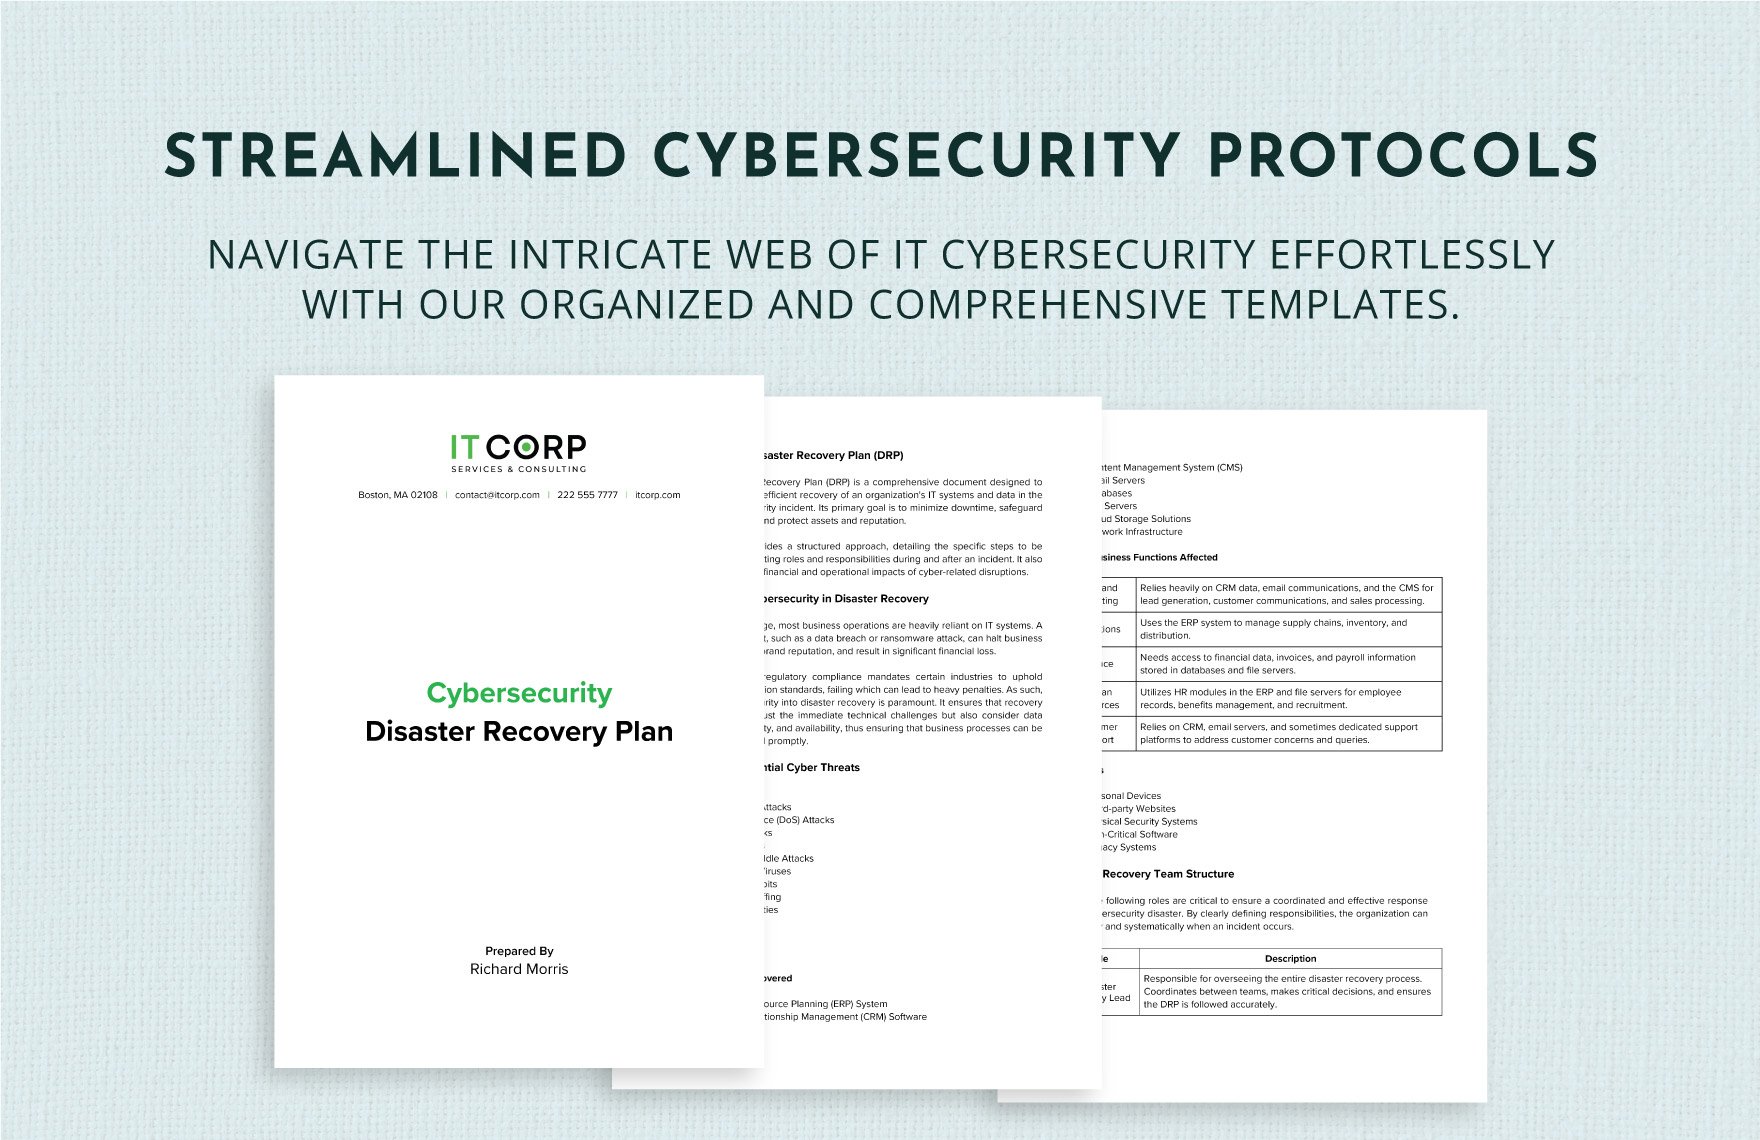 Cybersecurity Disaster Recovery Plan Template